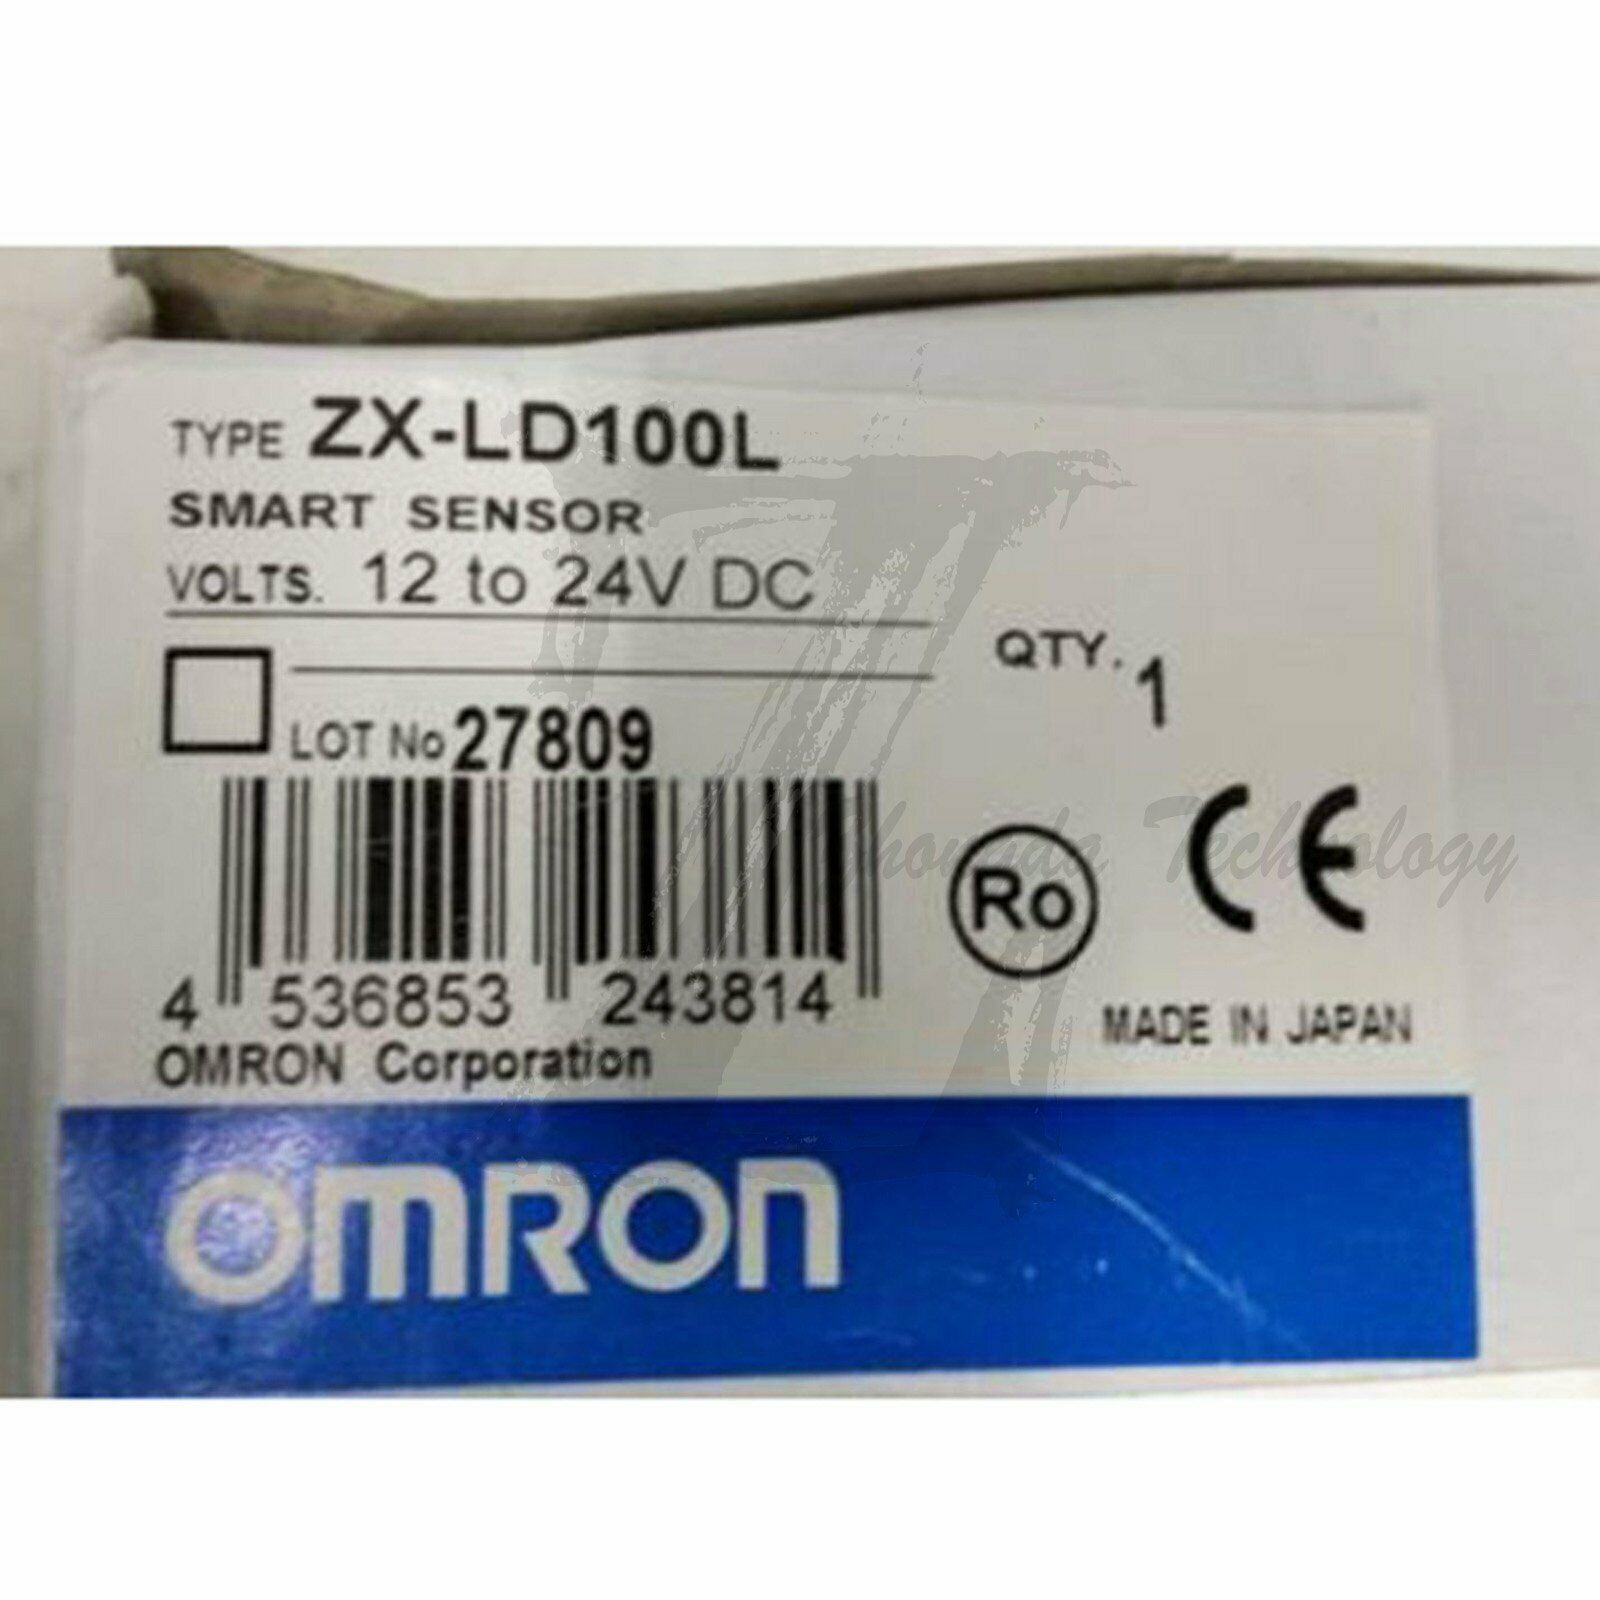 1pc new Omron ZX-LD100L module one year warranty KOEED 500+, 90%, import_2020_10_10_031751, Omron, Other